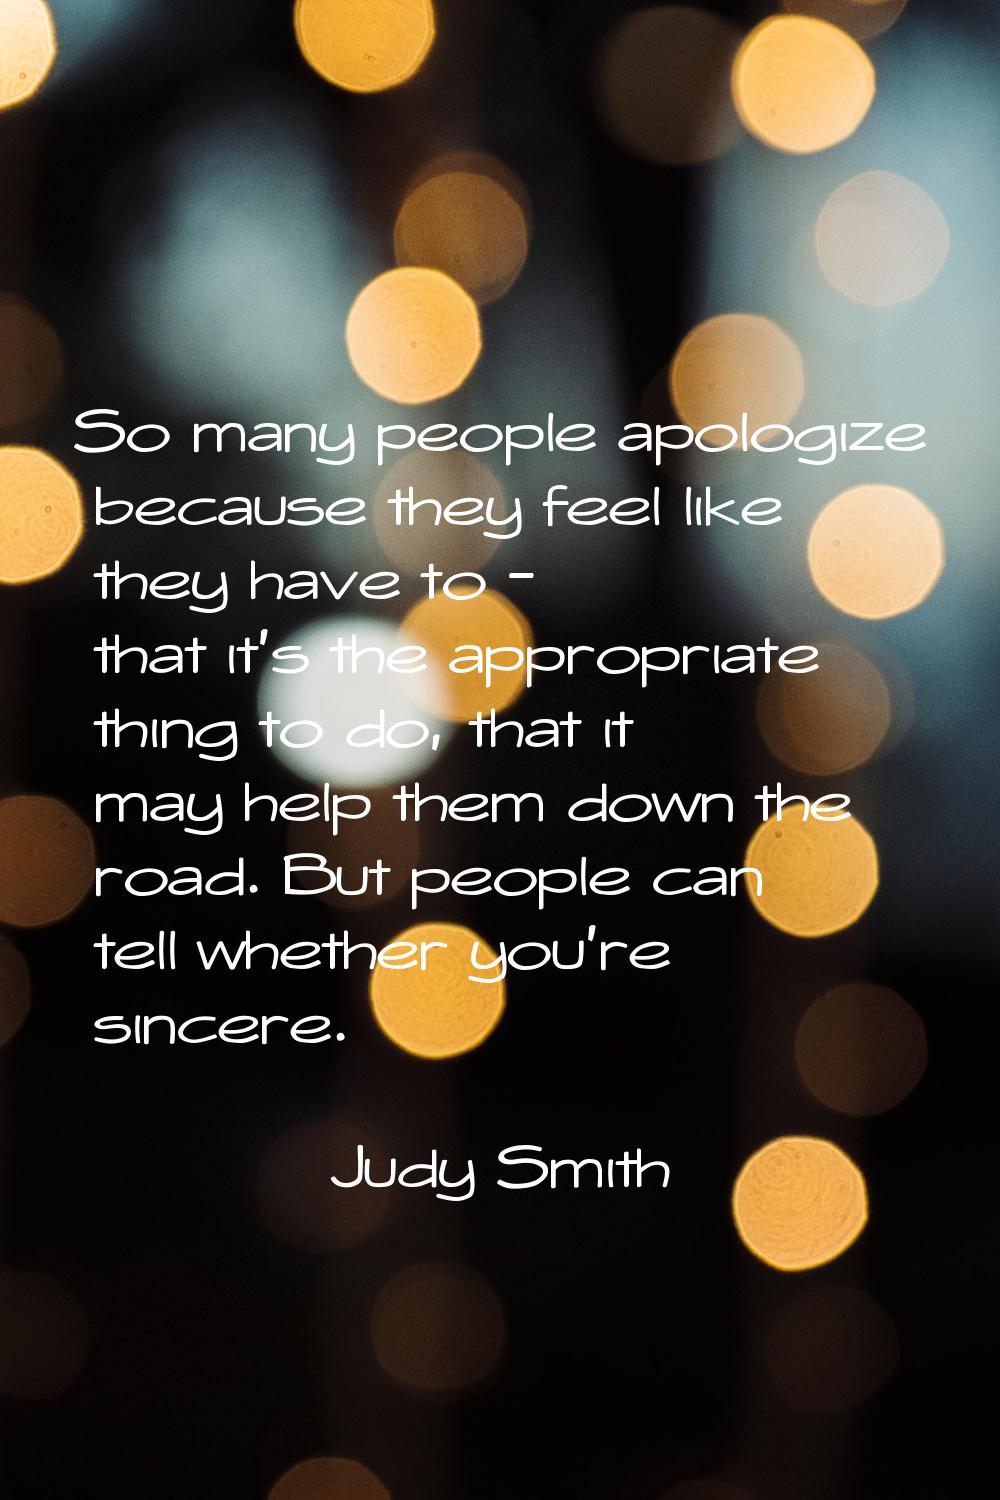 So many people apologize because they feel like they have to - that it's the appropriate thing to d